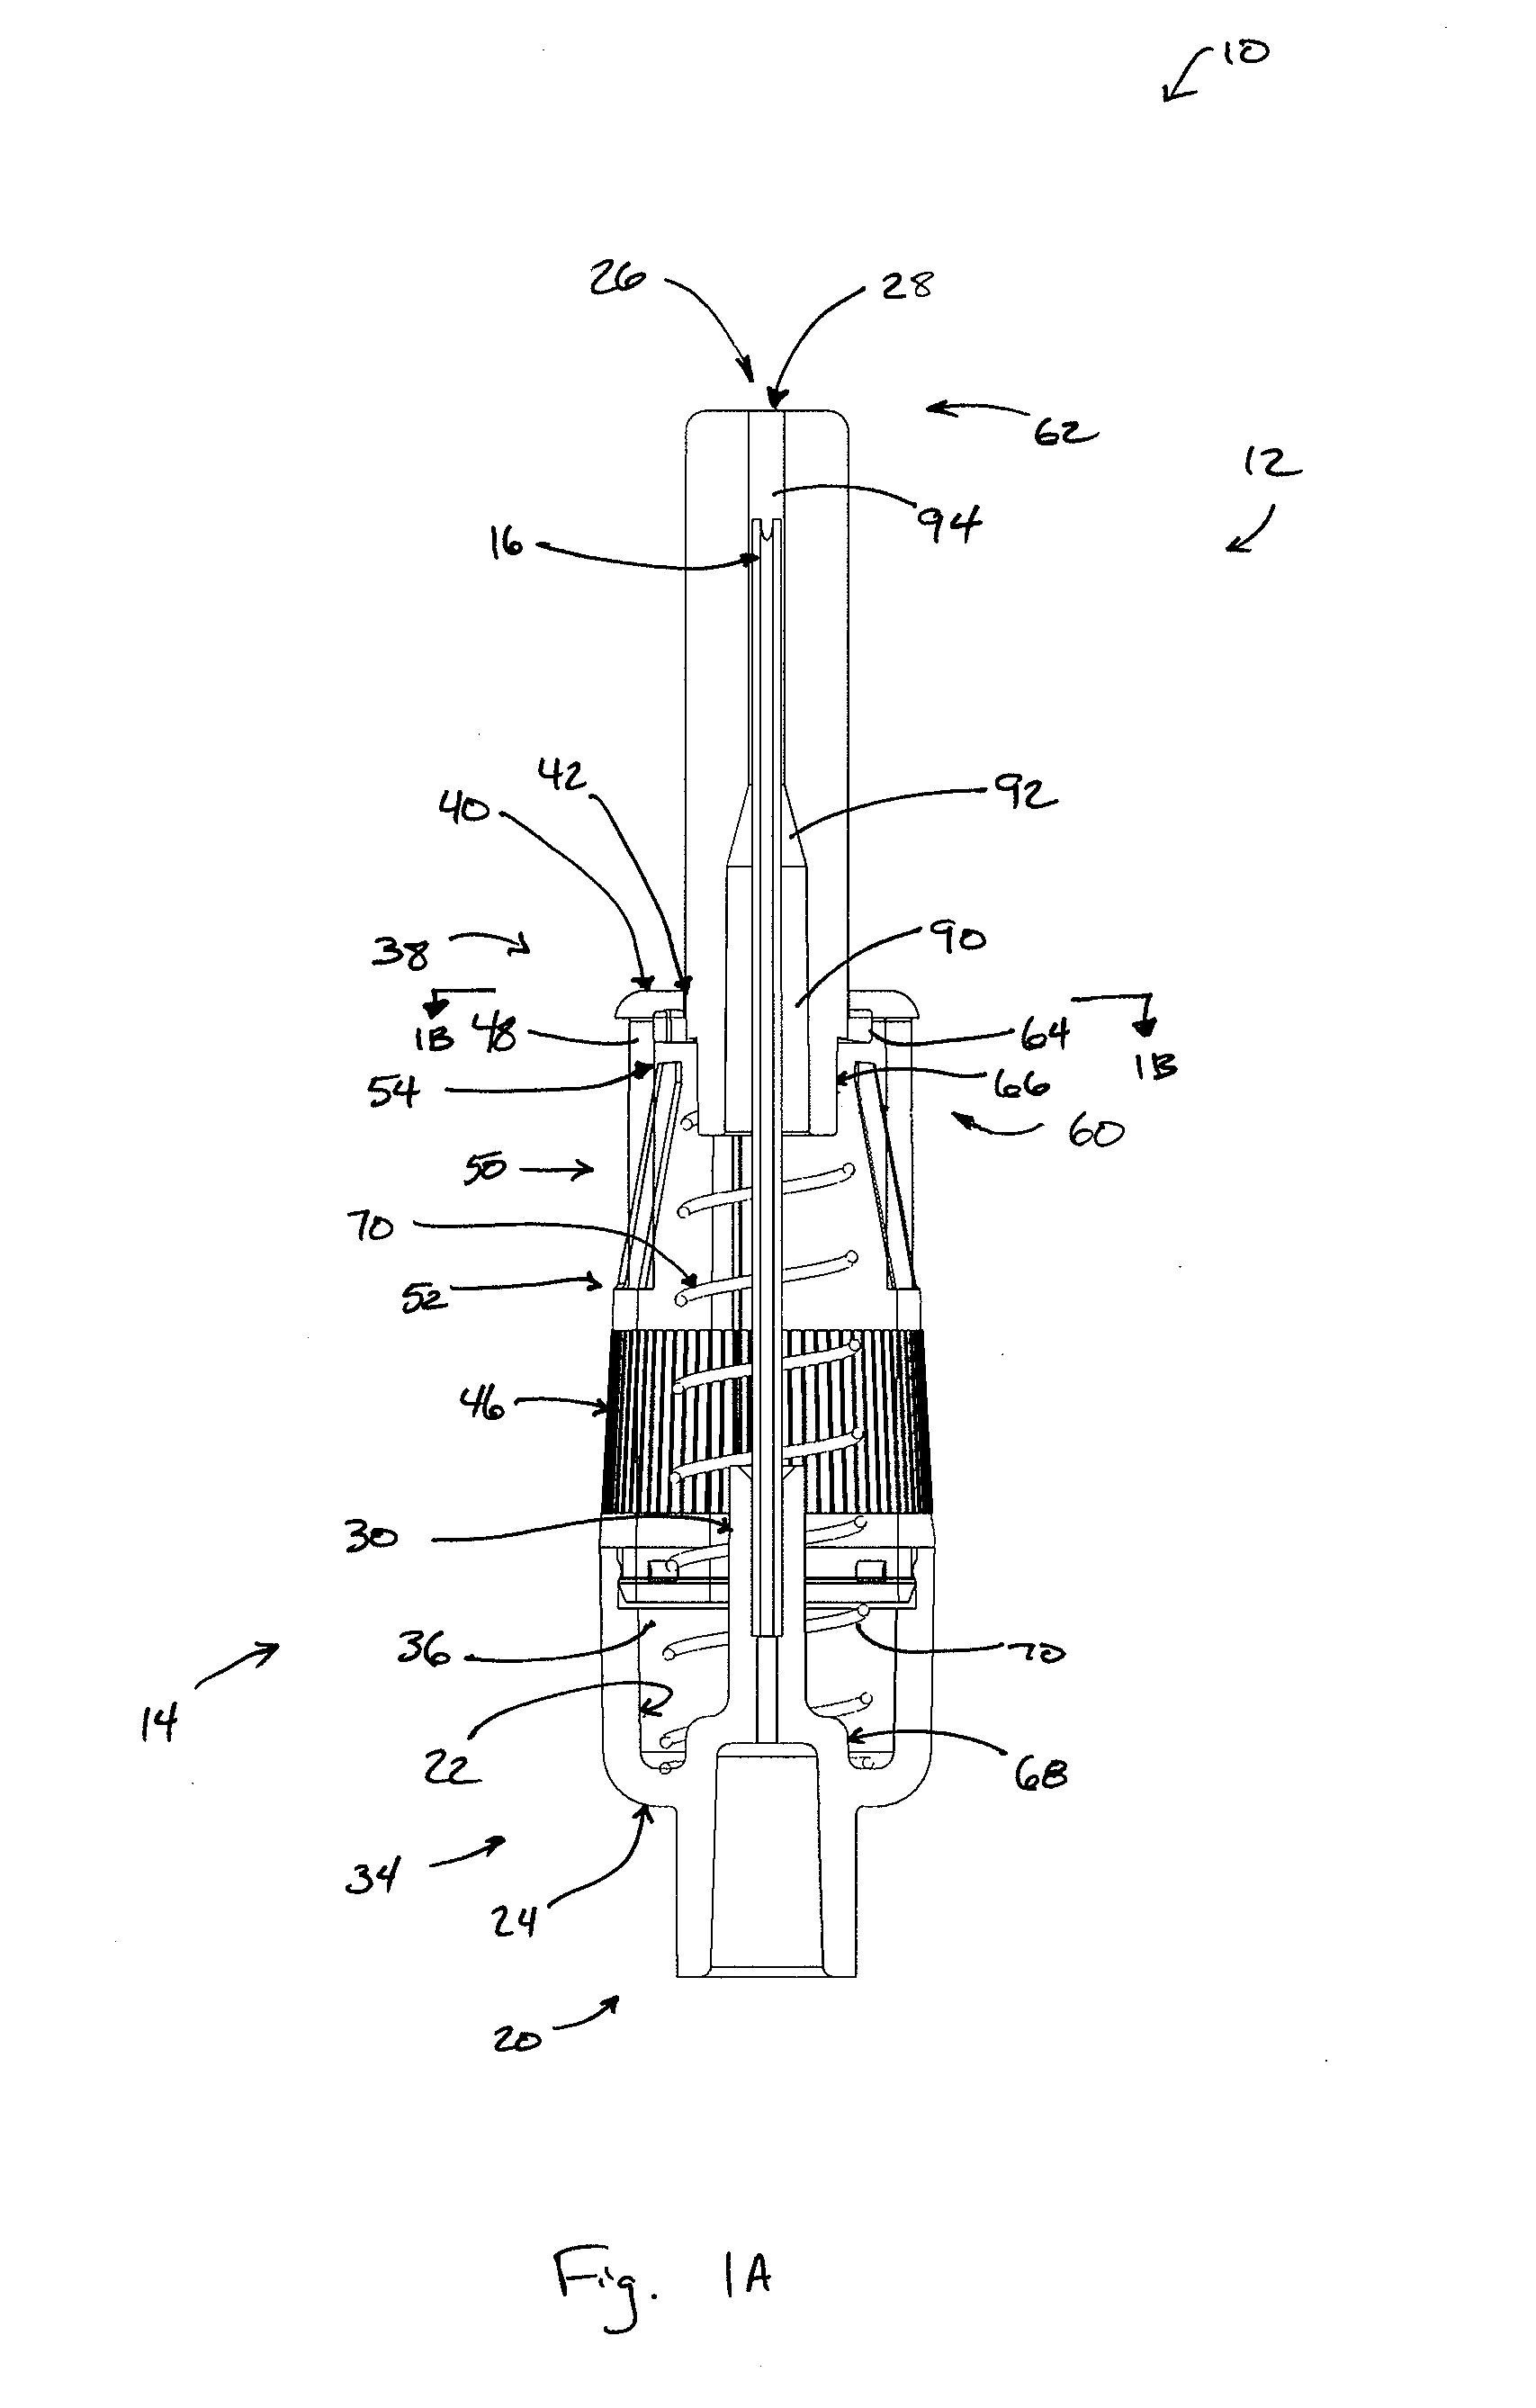 Automatic-locking safety needle covers and methods of use and manufacture